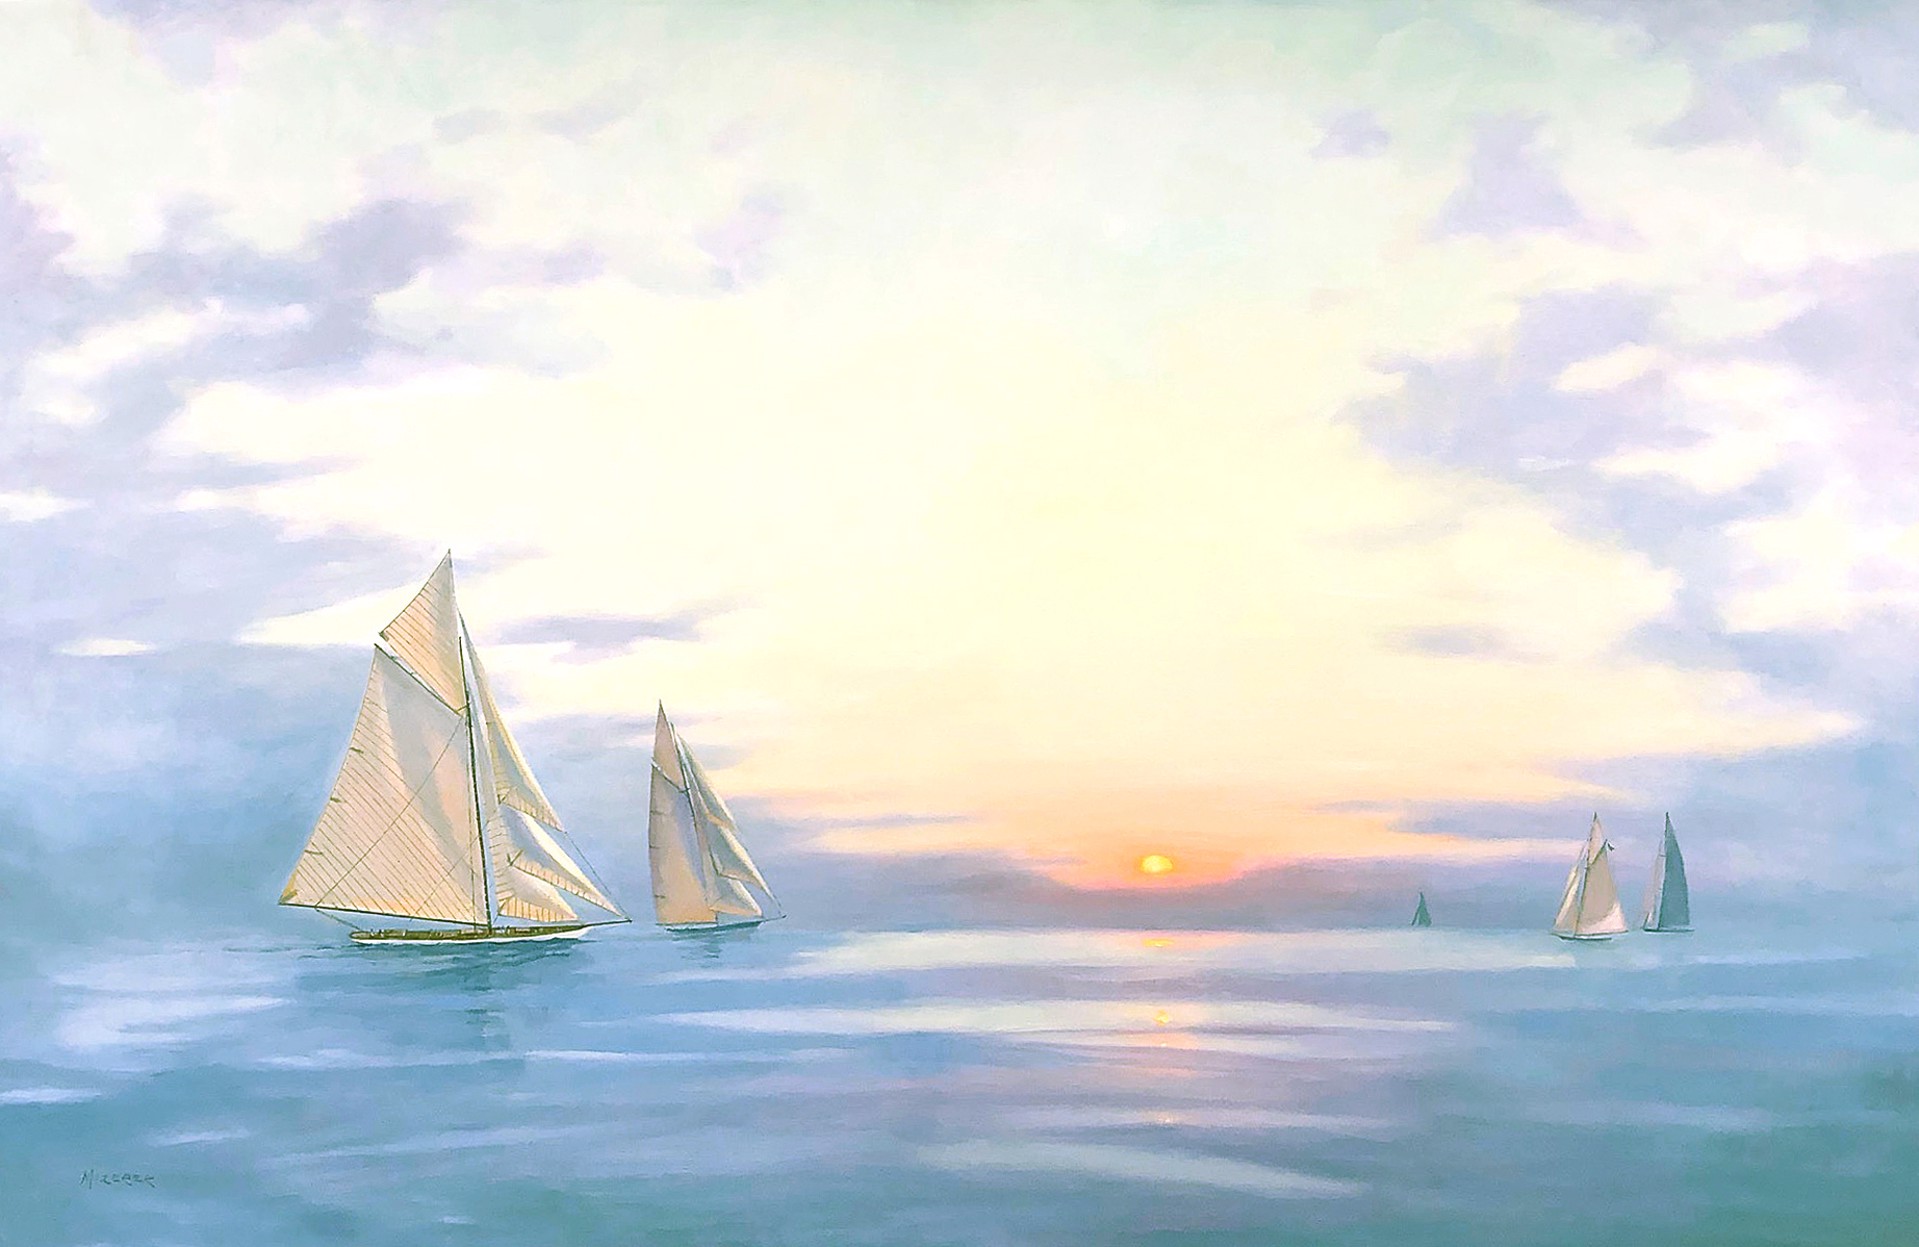 "Sailing Out Of The Mist" by Leonard Mizerek